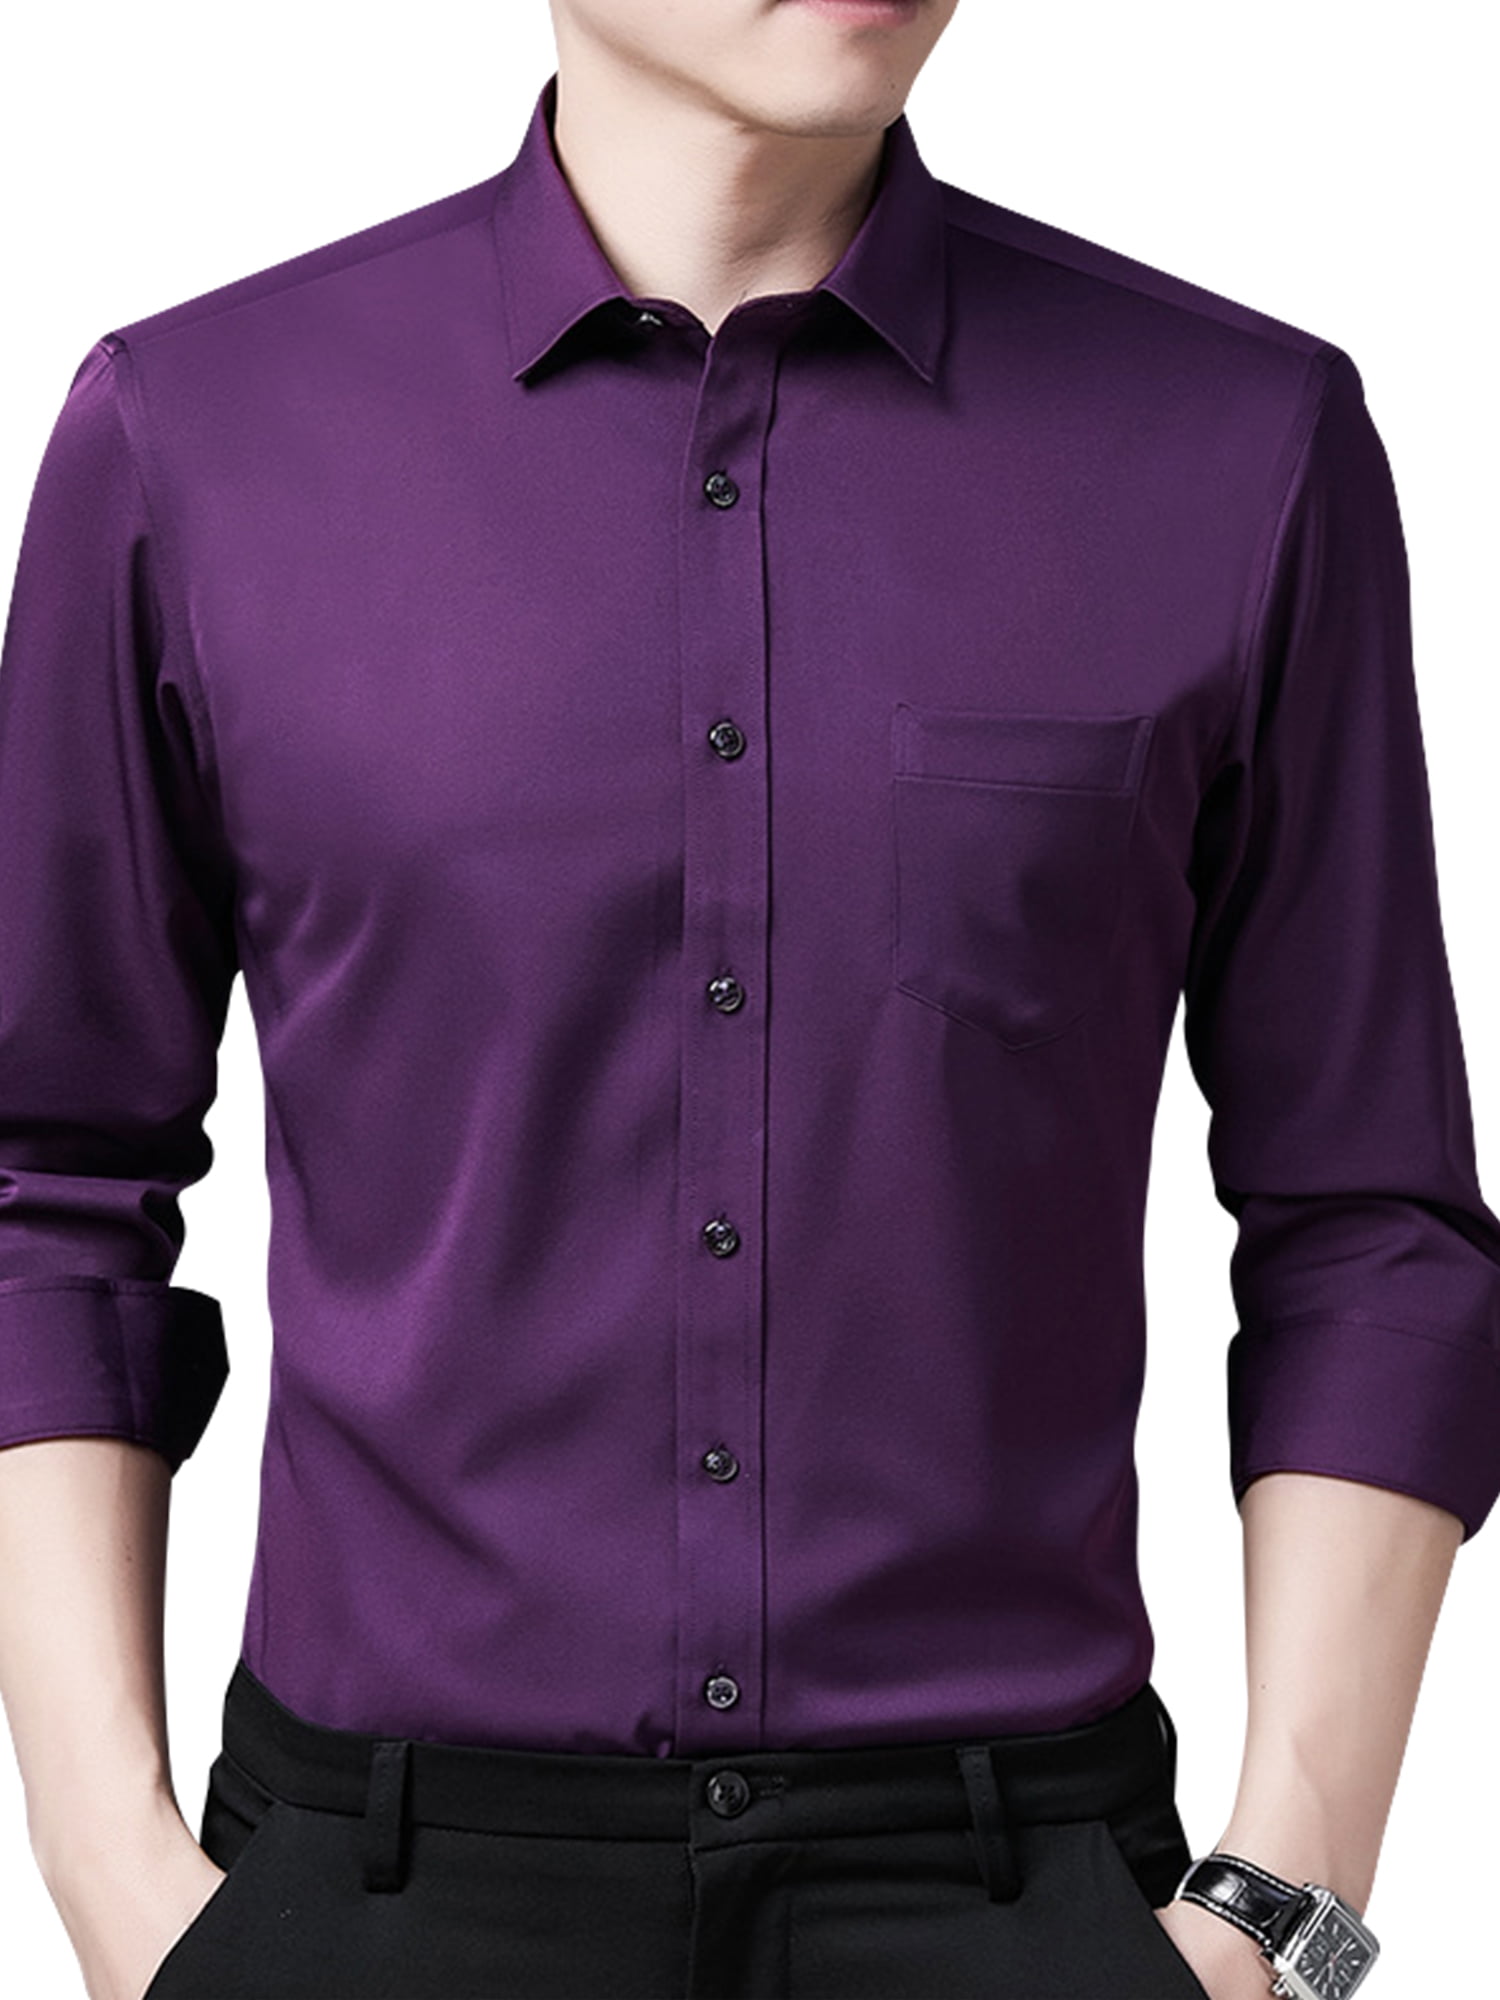 Mens Dress Shirts Long Sleeves Luxury Casual Slim Fit Business Mulitcolor Shirts